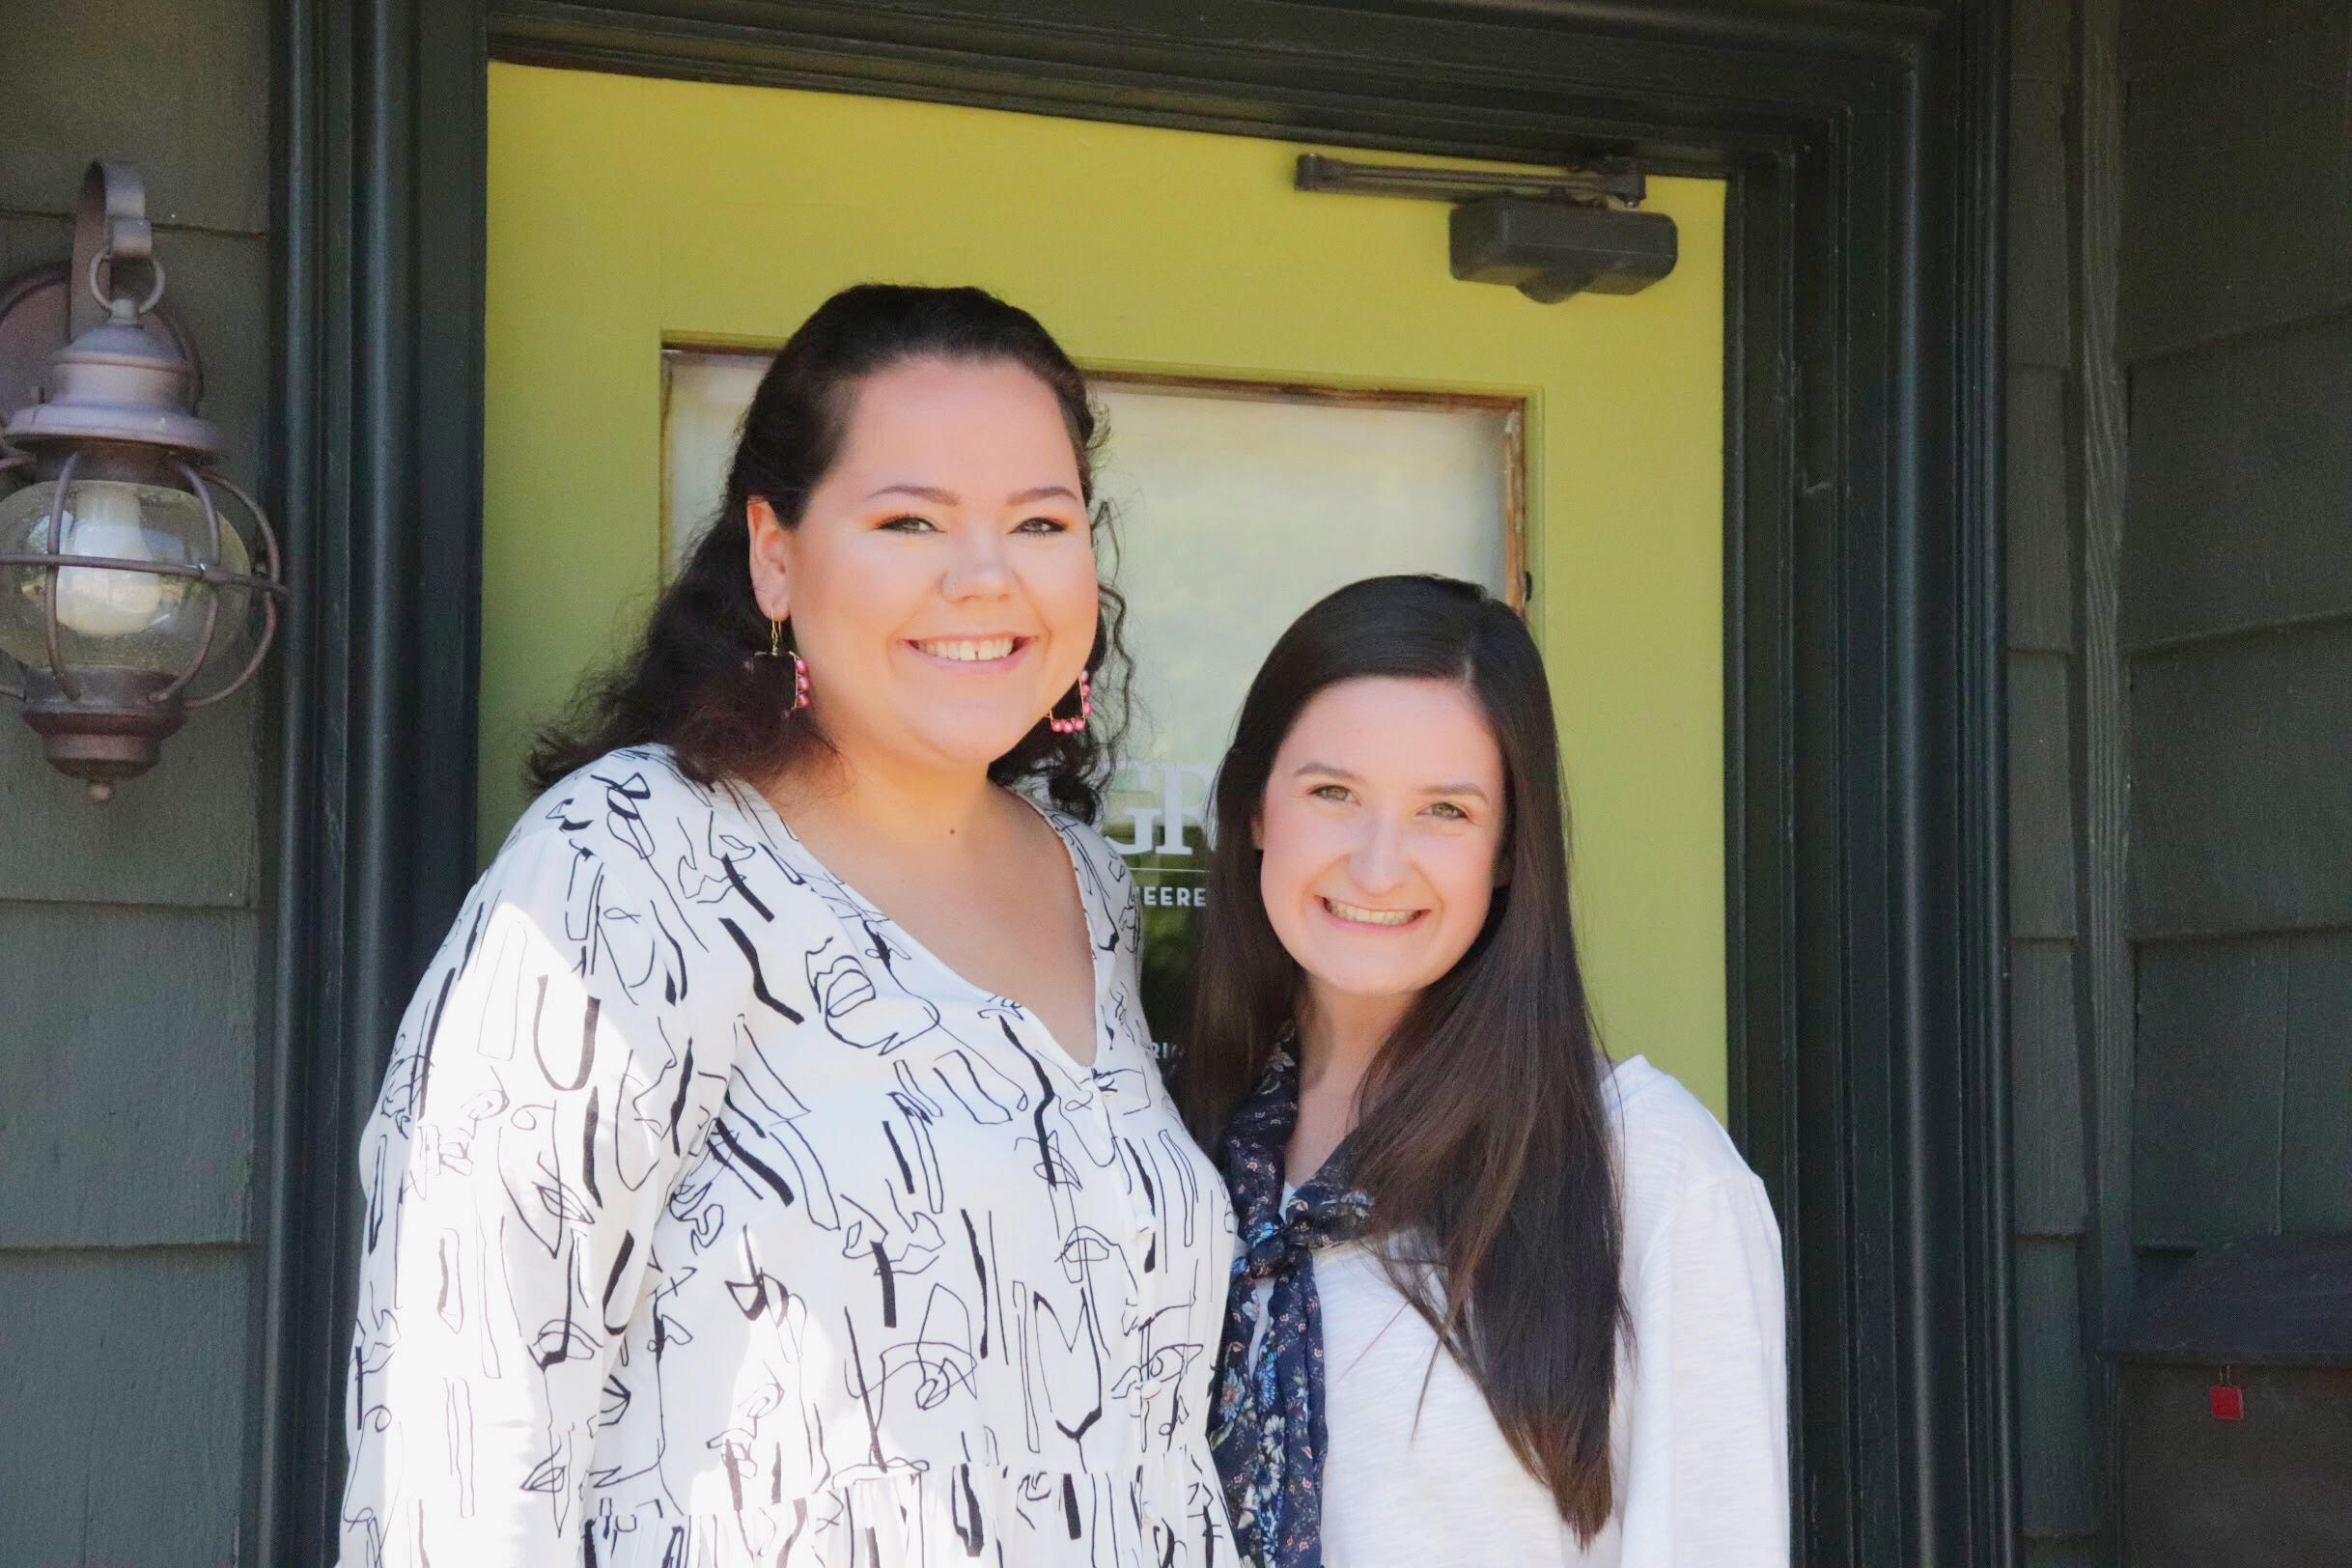 Pictured are TRINDGROUP's 2019 Summer Interns, Charlotte and Erin.